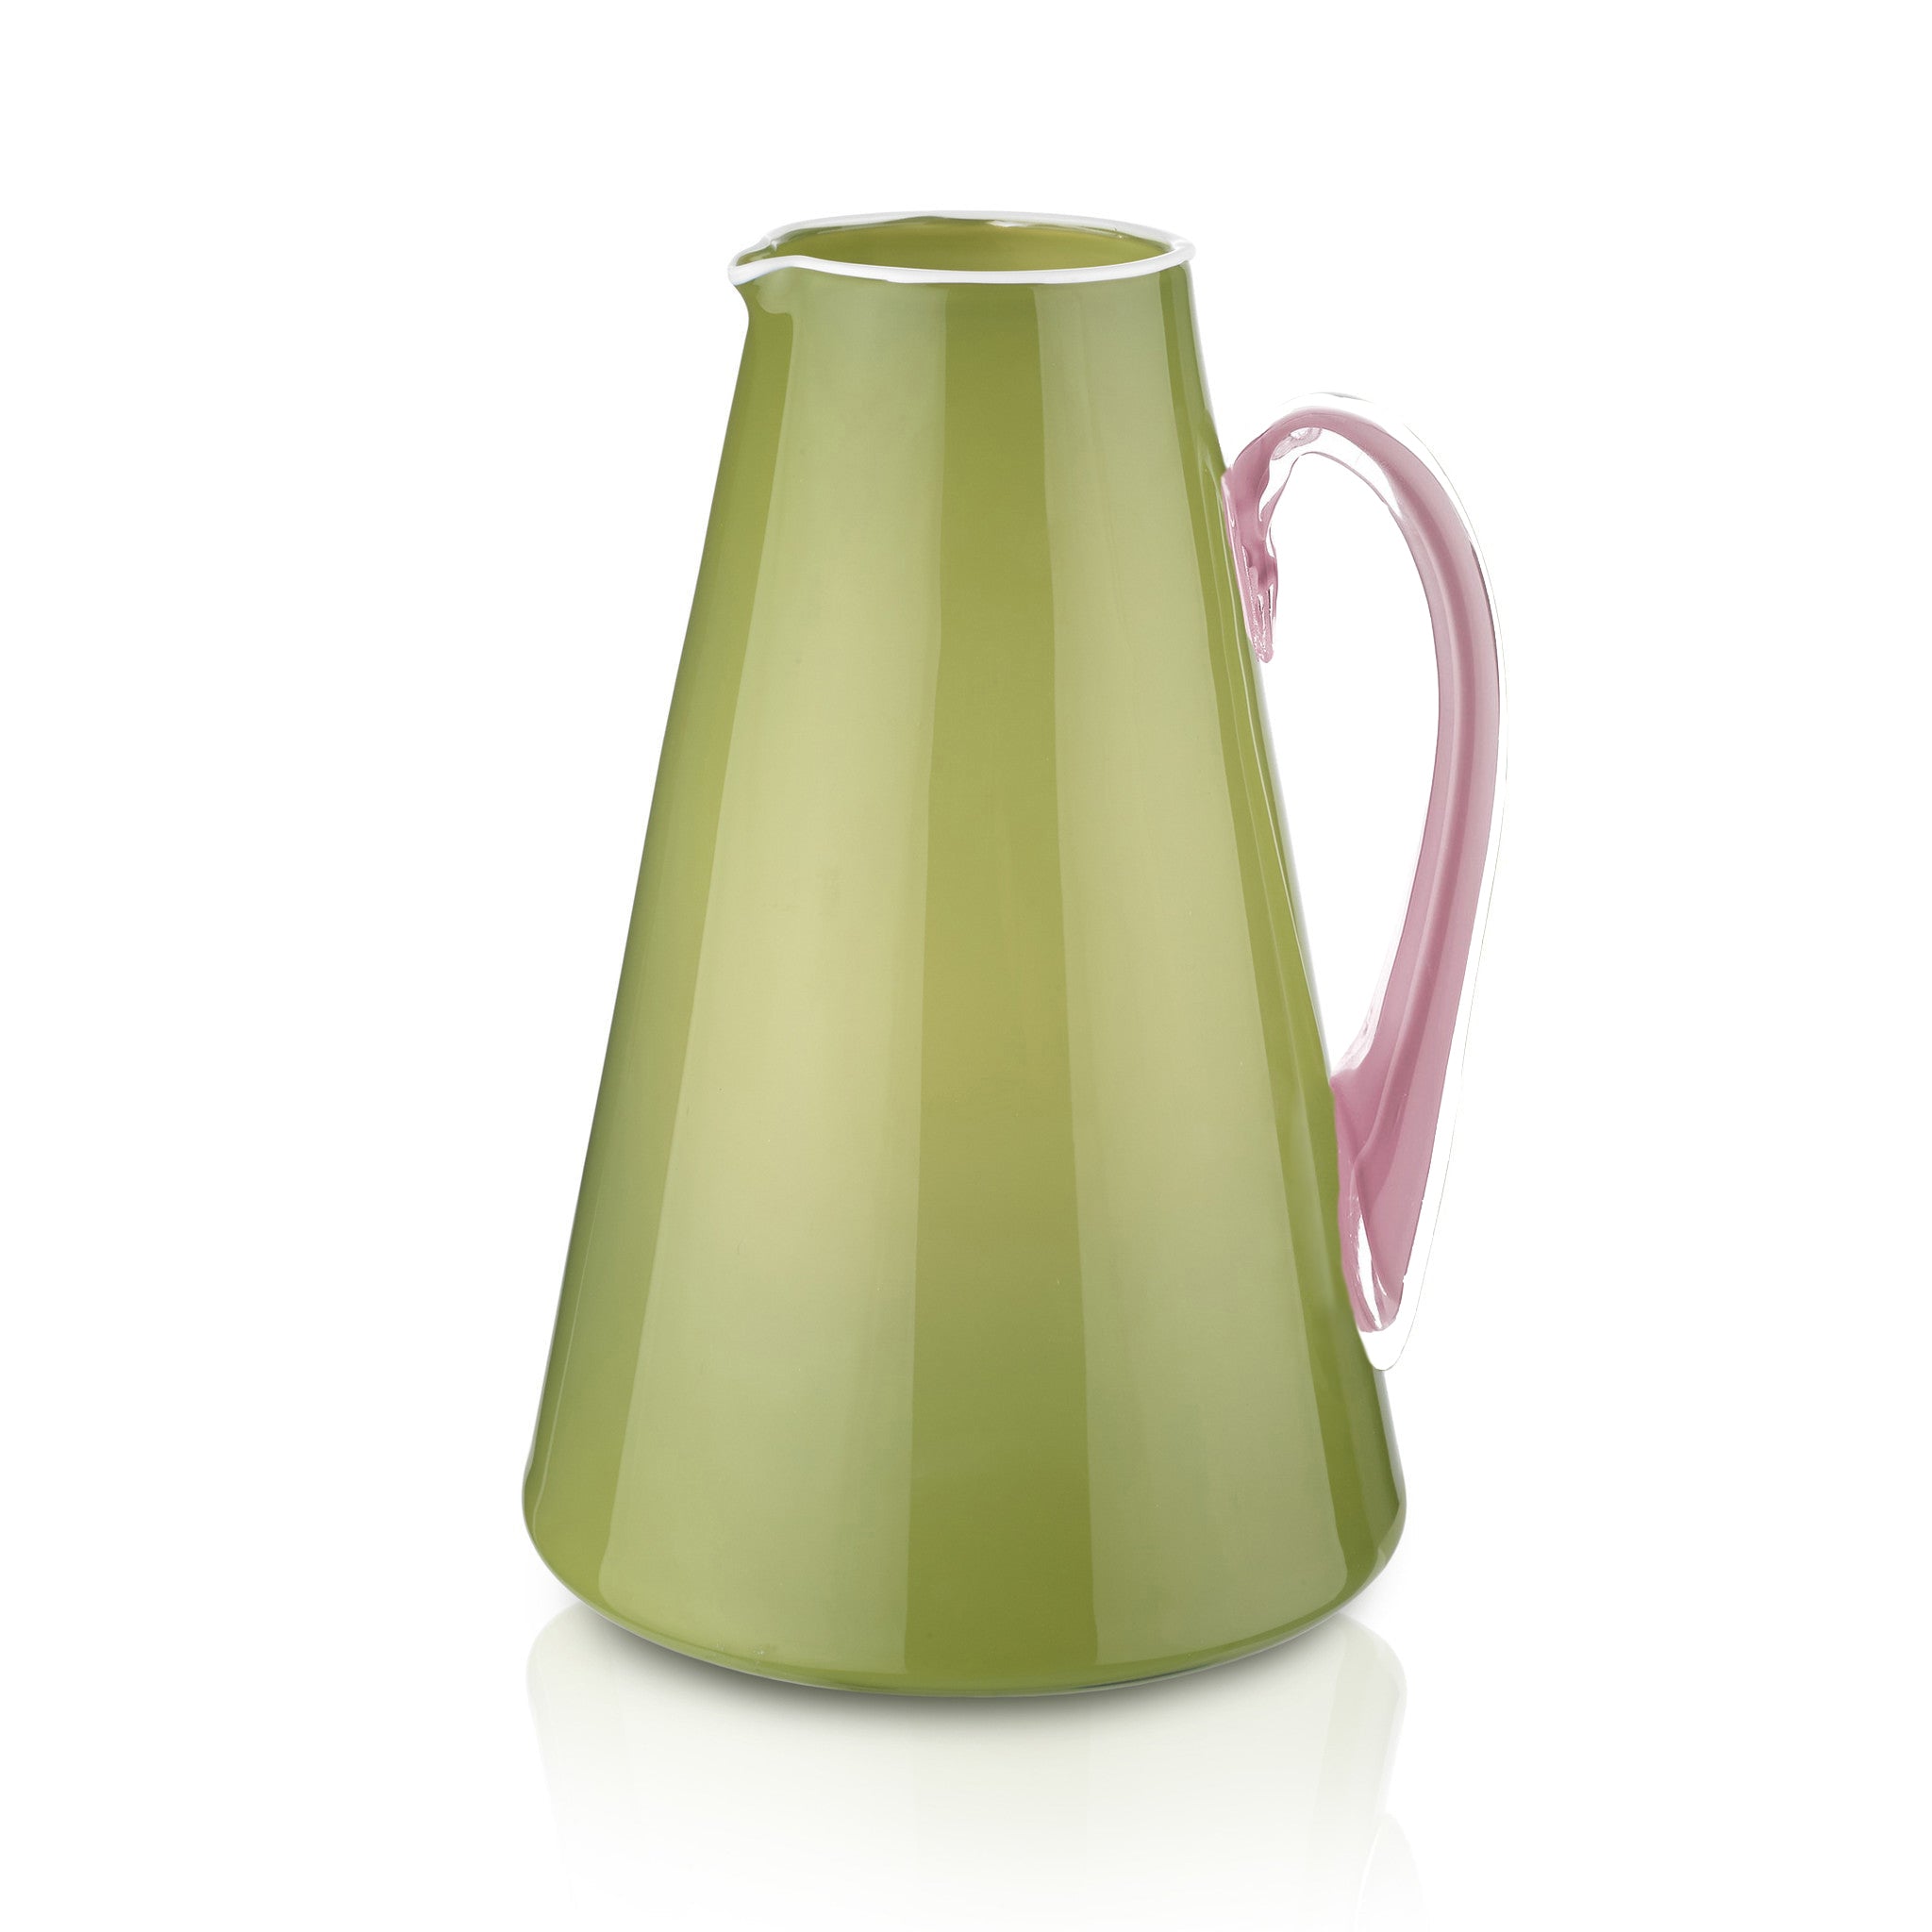 Handblown Glass Bumba Jug in Apple Green and Rose Pink, 3lt